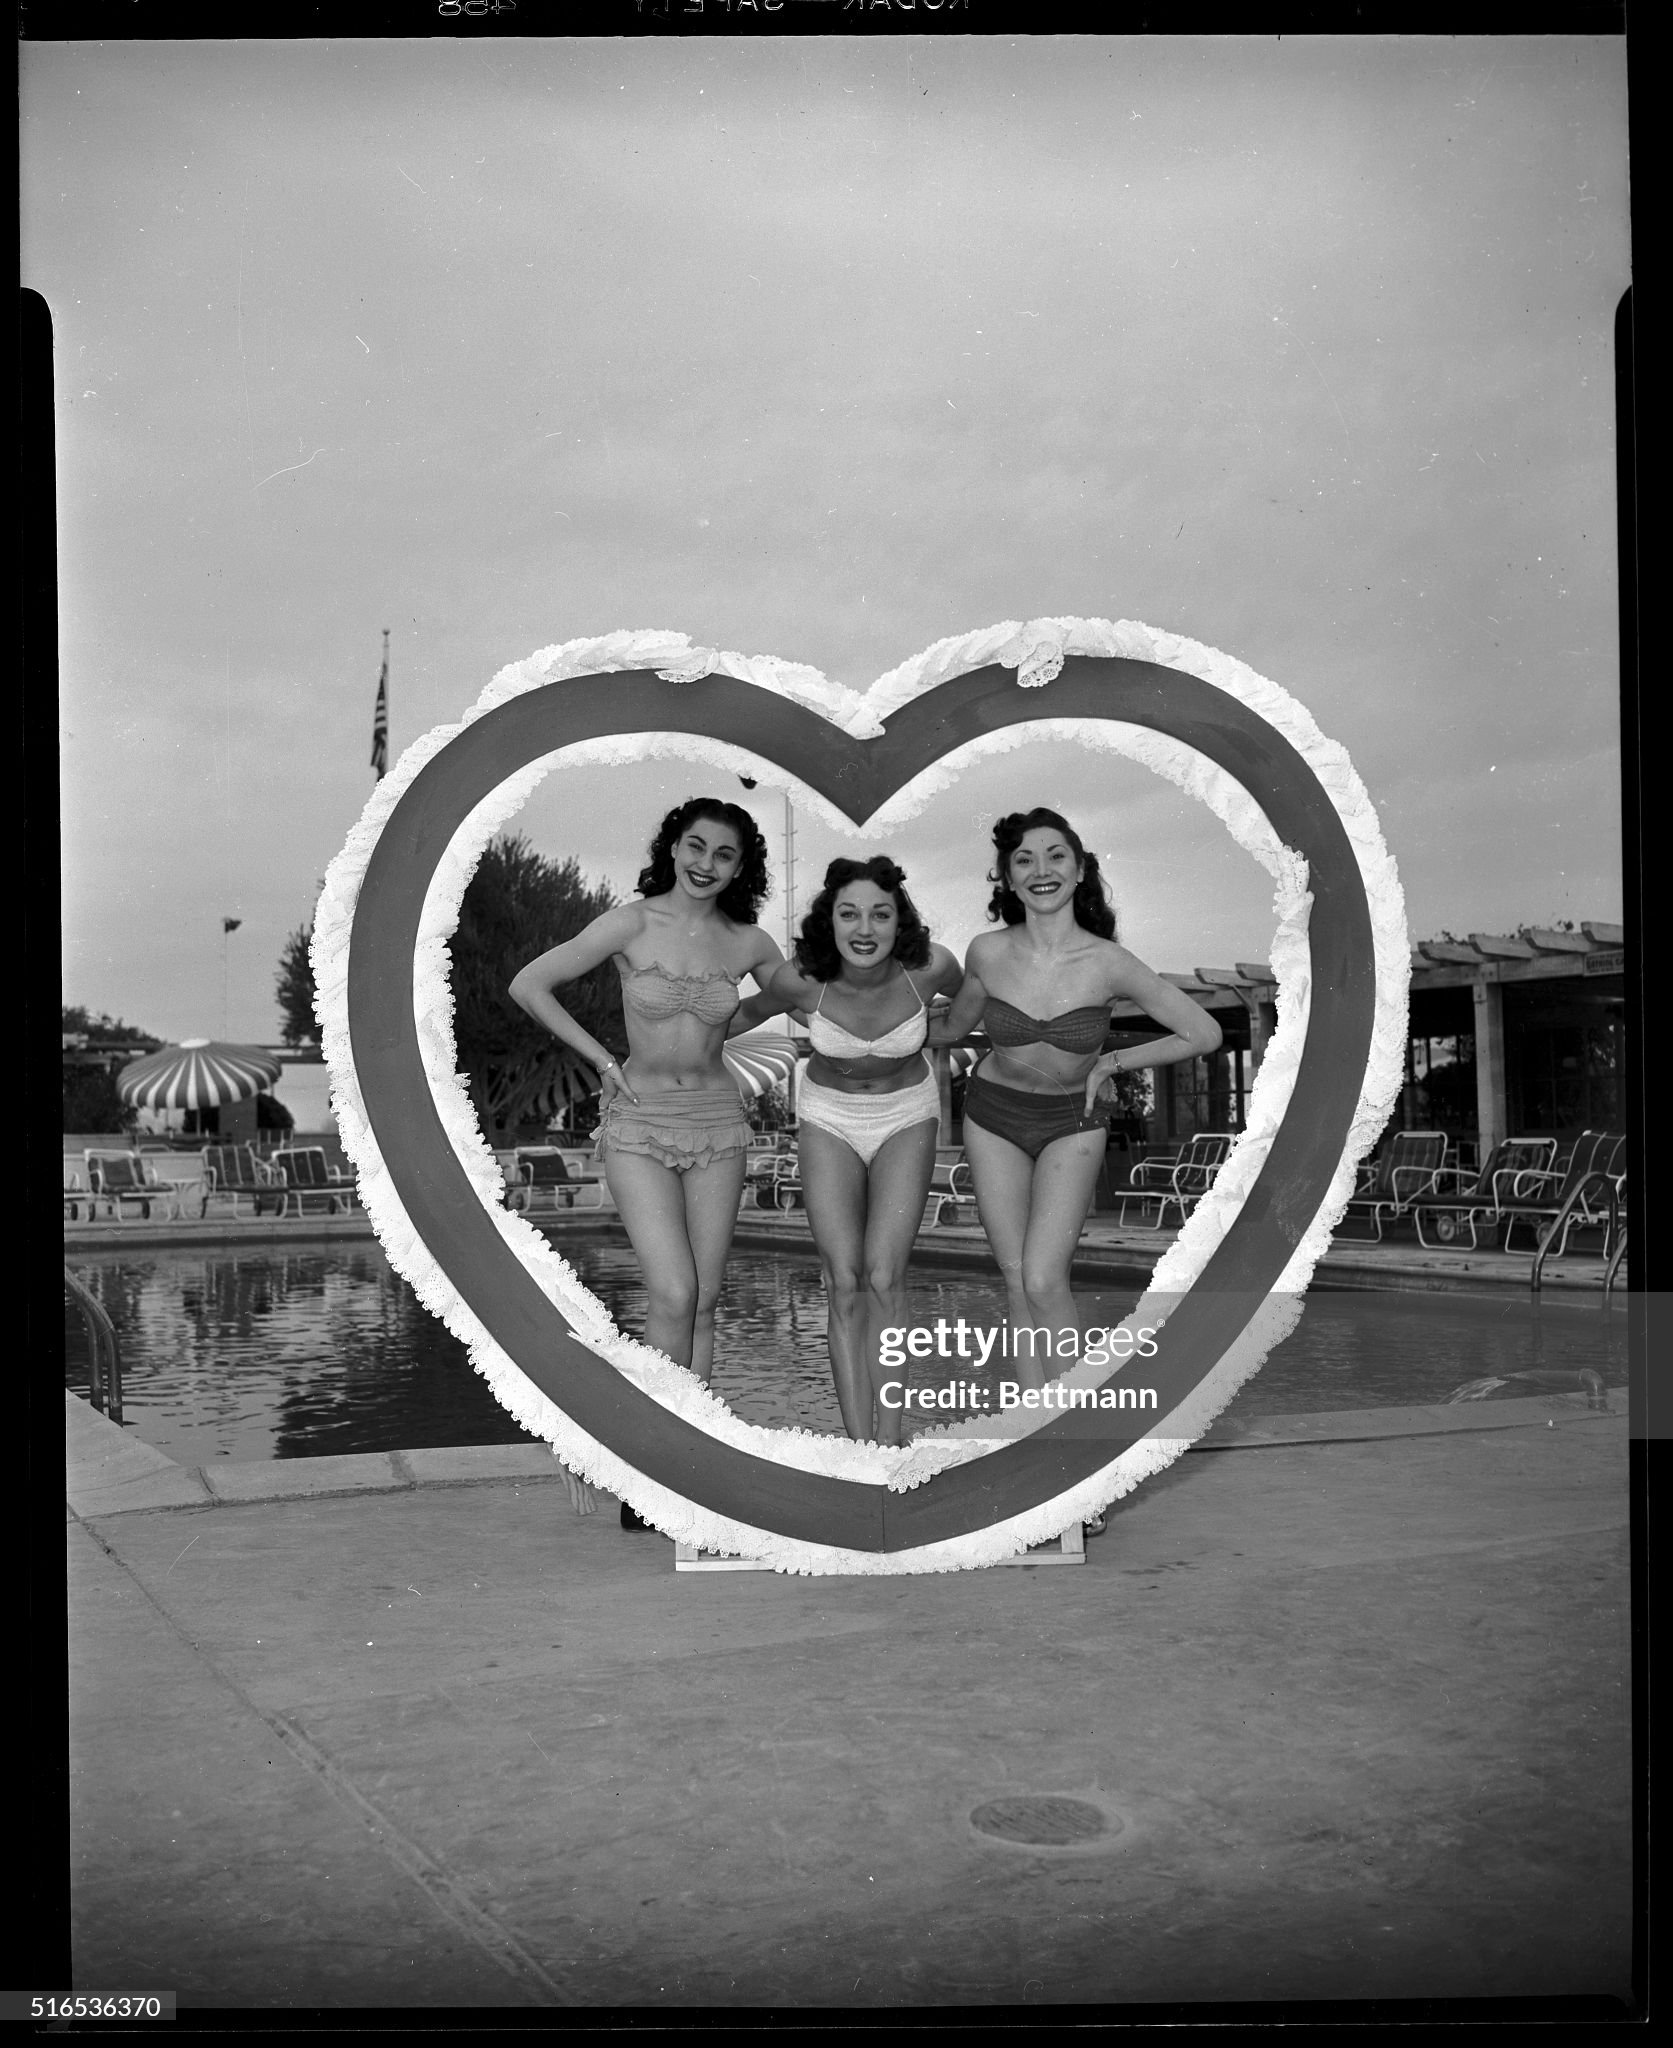 Ready to purvey the spirit of St. Valentine's Day, these three, from the Hotel Last Frontier, rehearse a special heart show outdoors for visitors who will spend Valentine's Day in Las Vegas. From left to right: Renee Molnar, Candyce King and Dolores Frazzini. Undated photo circa 1940s. 